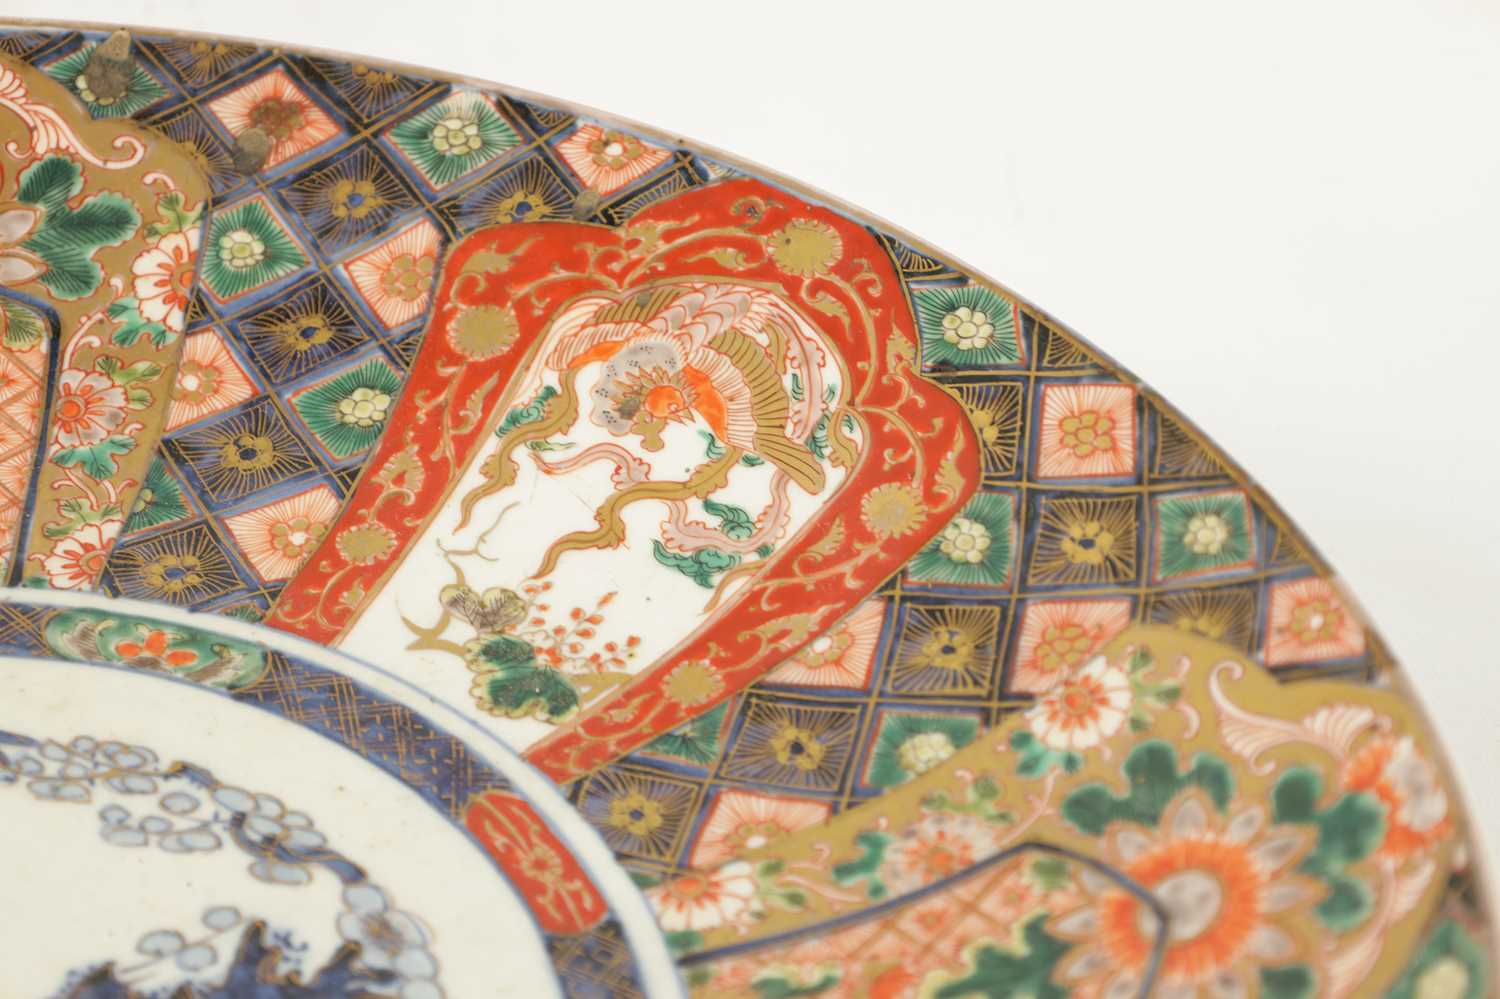 A PAIR OF 19TH CENTURY JAPANESE IMARI CHARGERS - Image 6 of 9